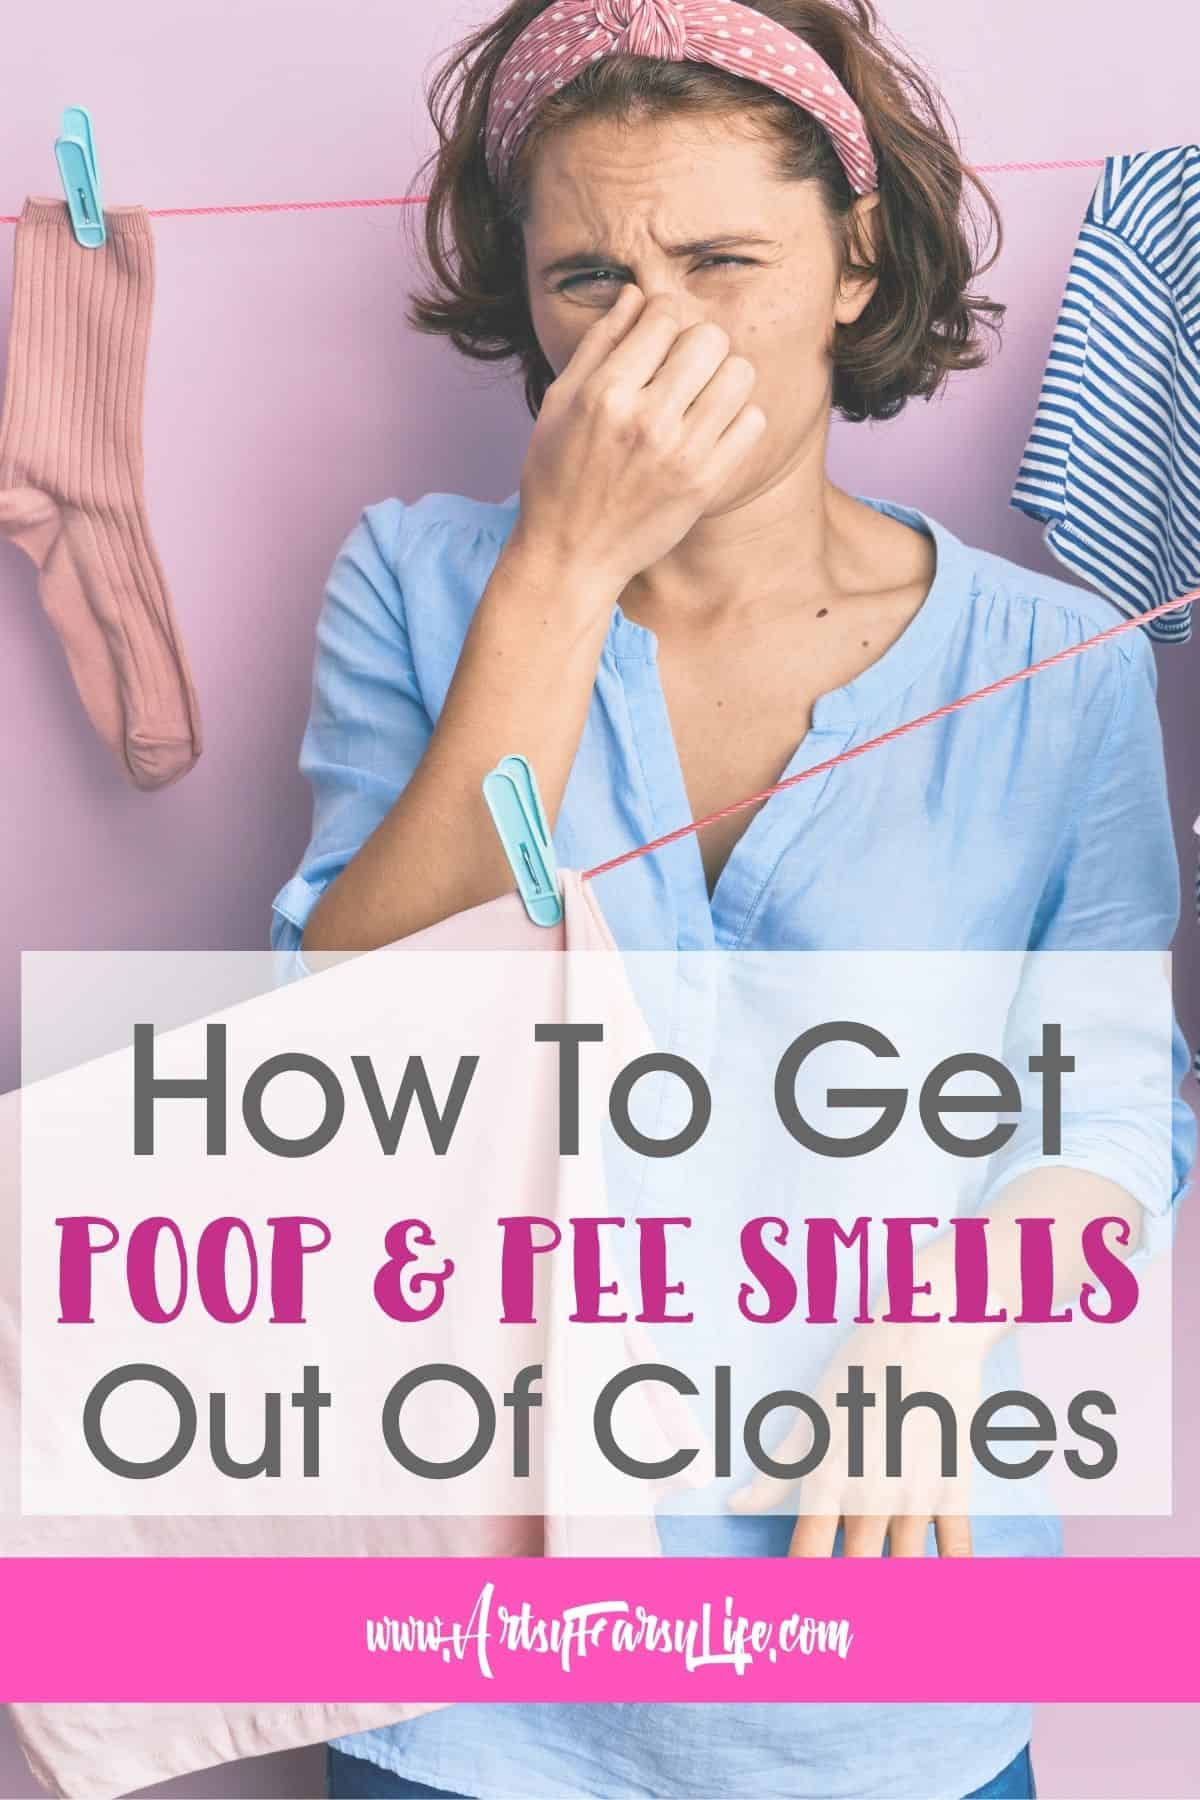 How To Get Rid of Urine and Feces Smells In Clothes